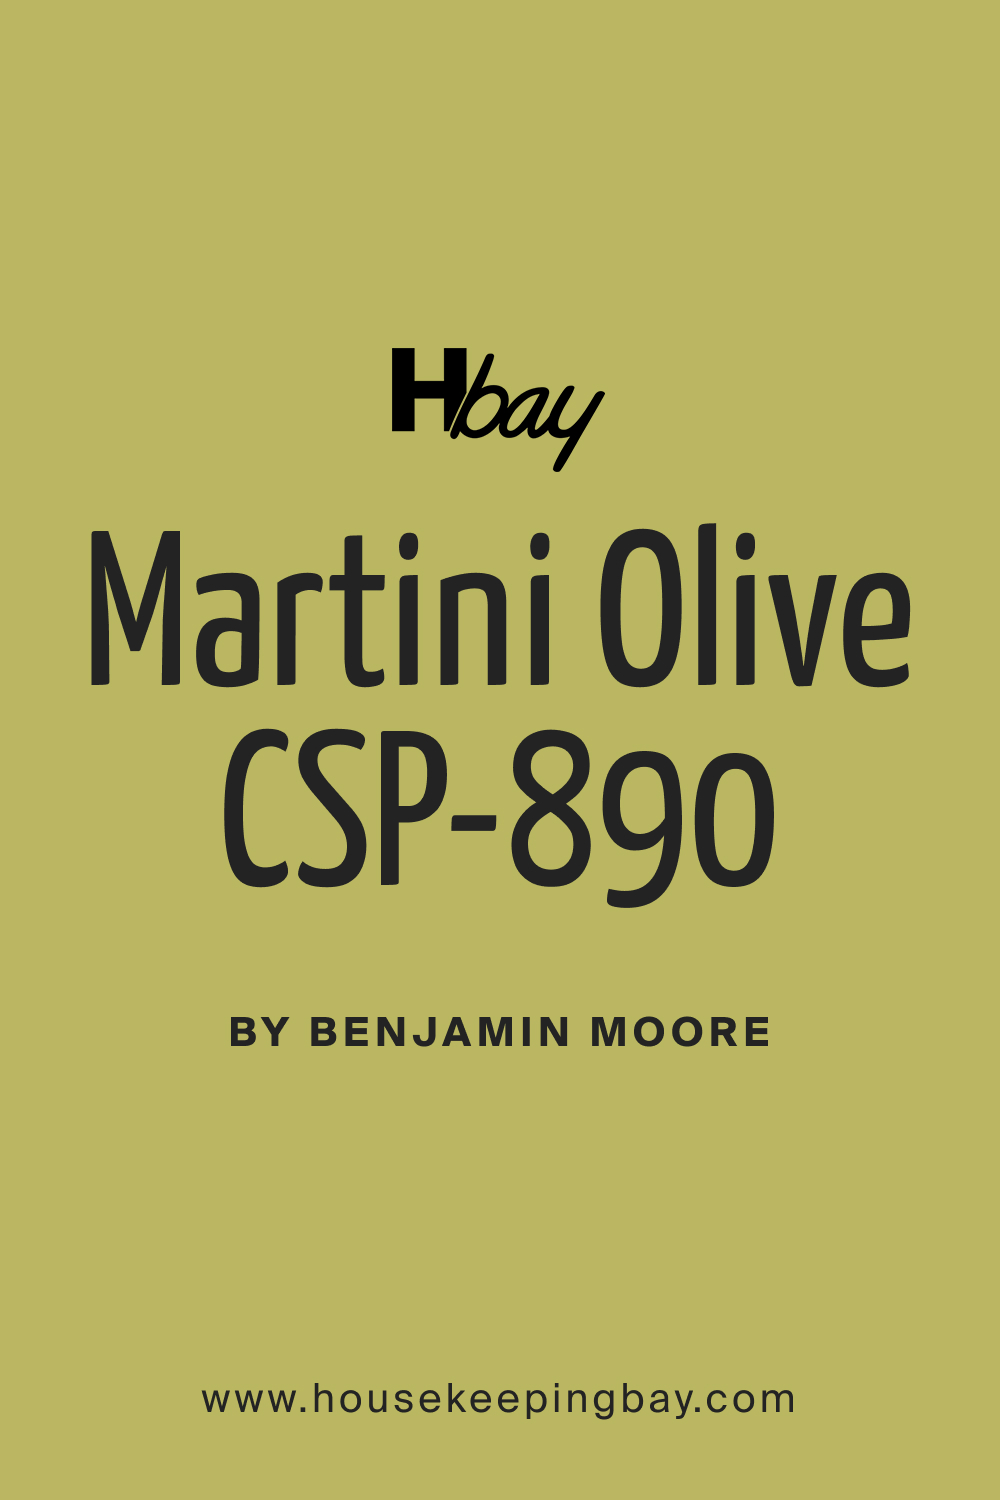 What Color Is Martini Olive CSP-890?